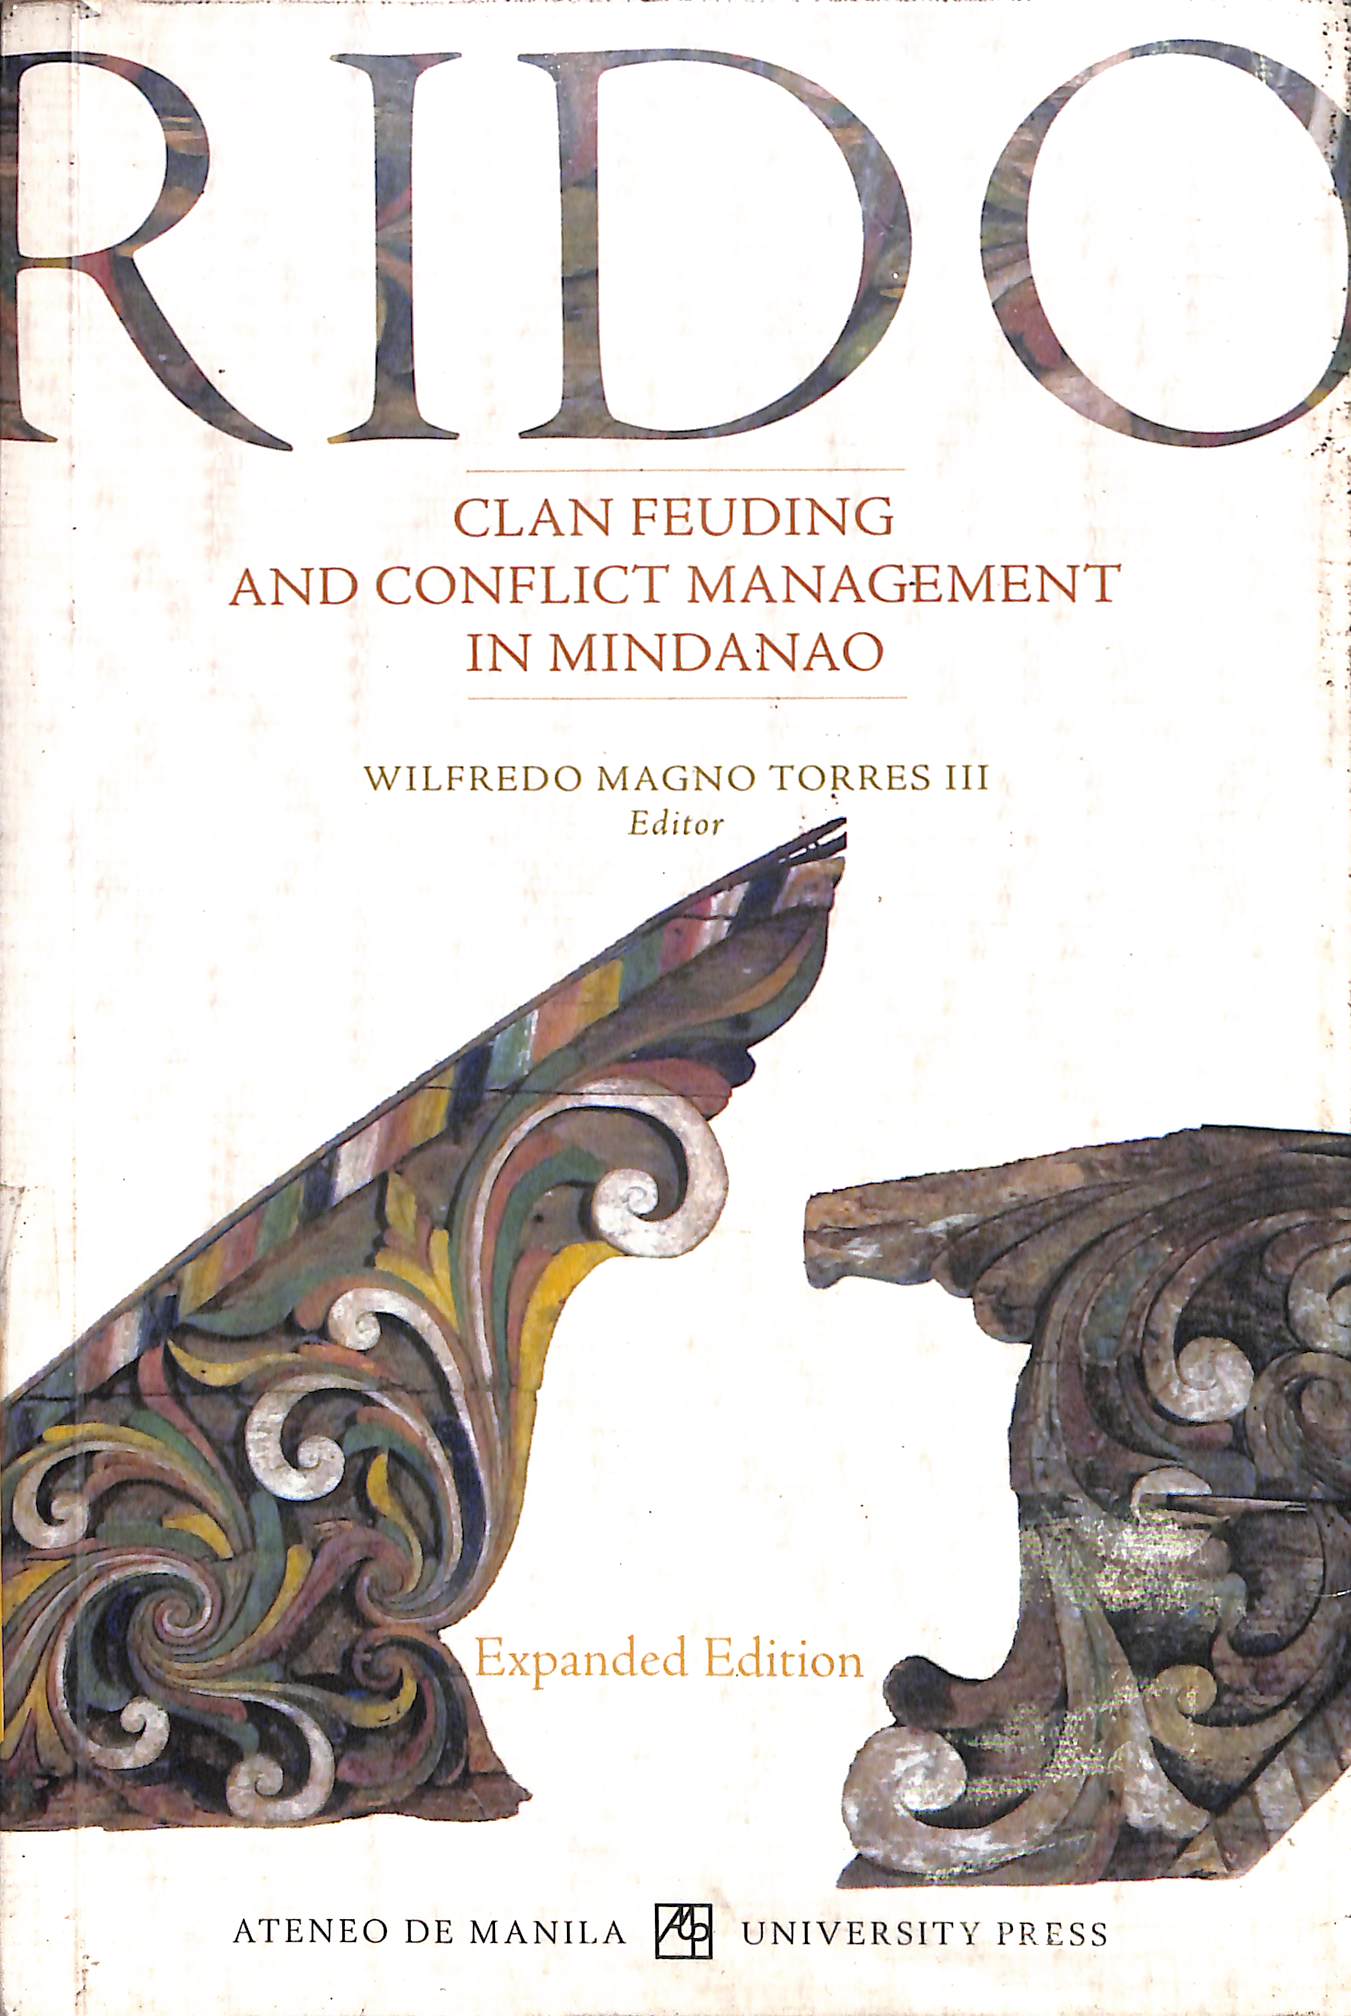 Rido clan feuding and conflict management in Mindanao